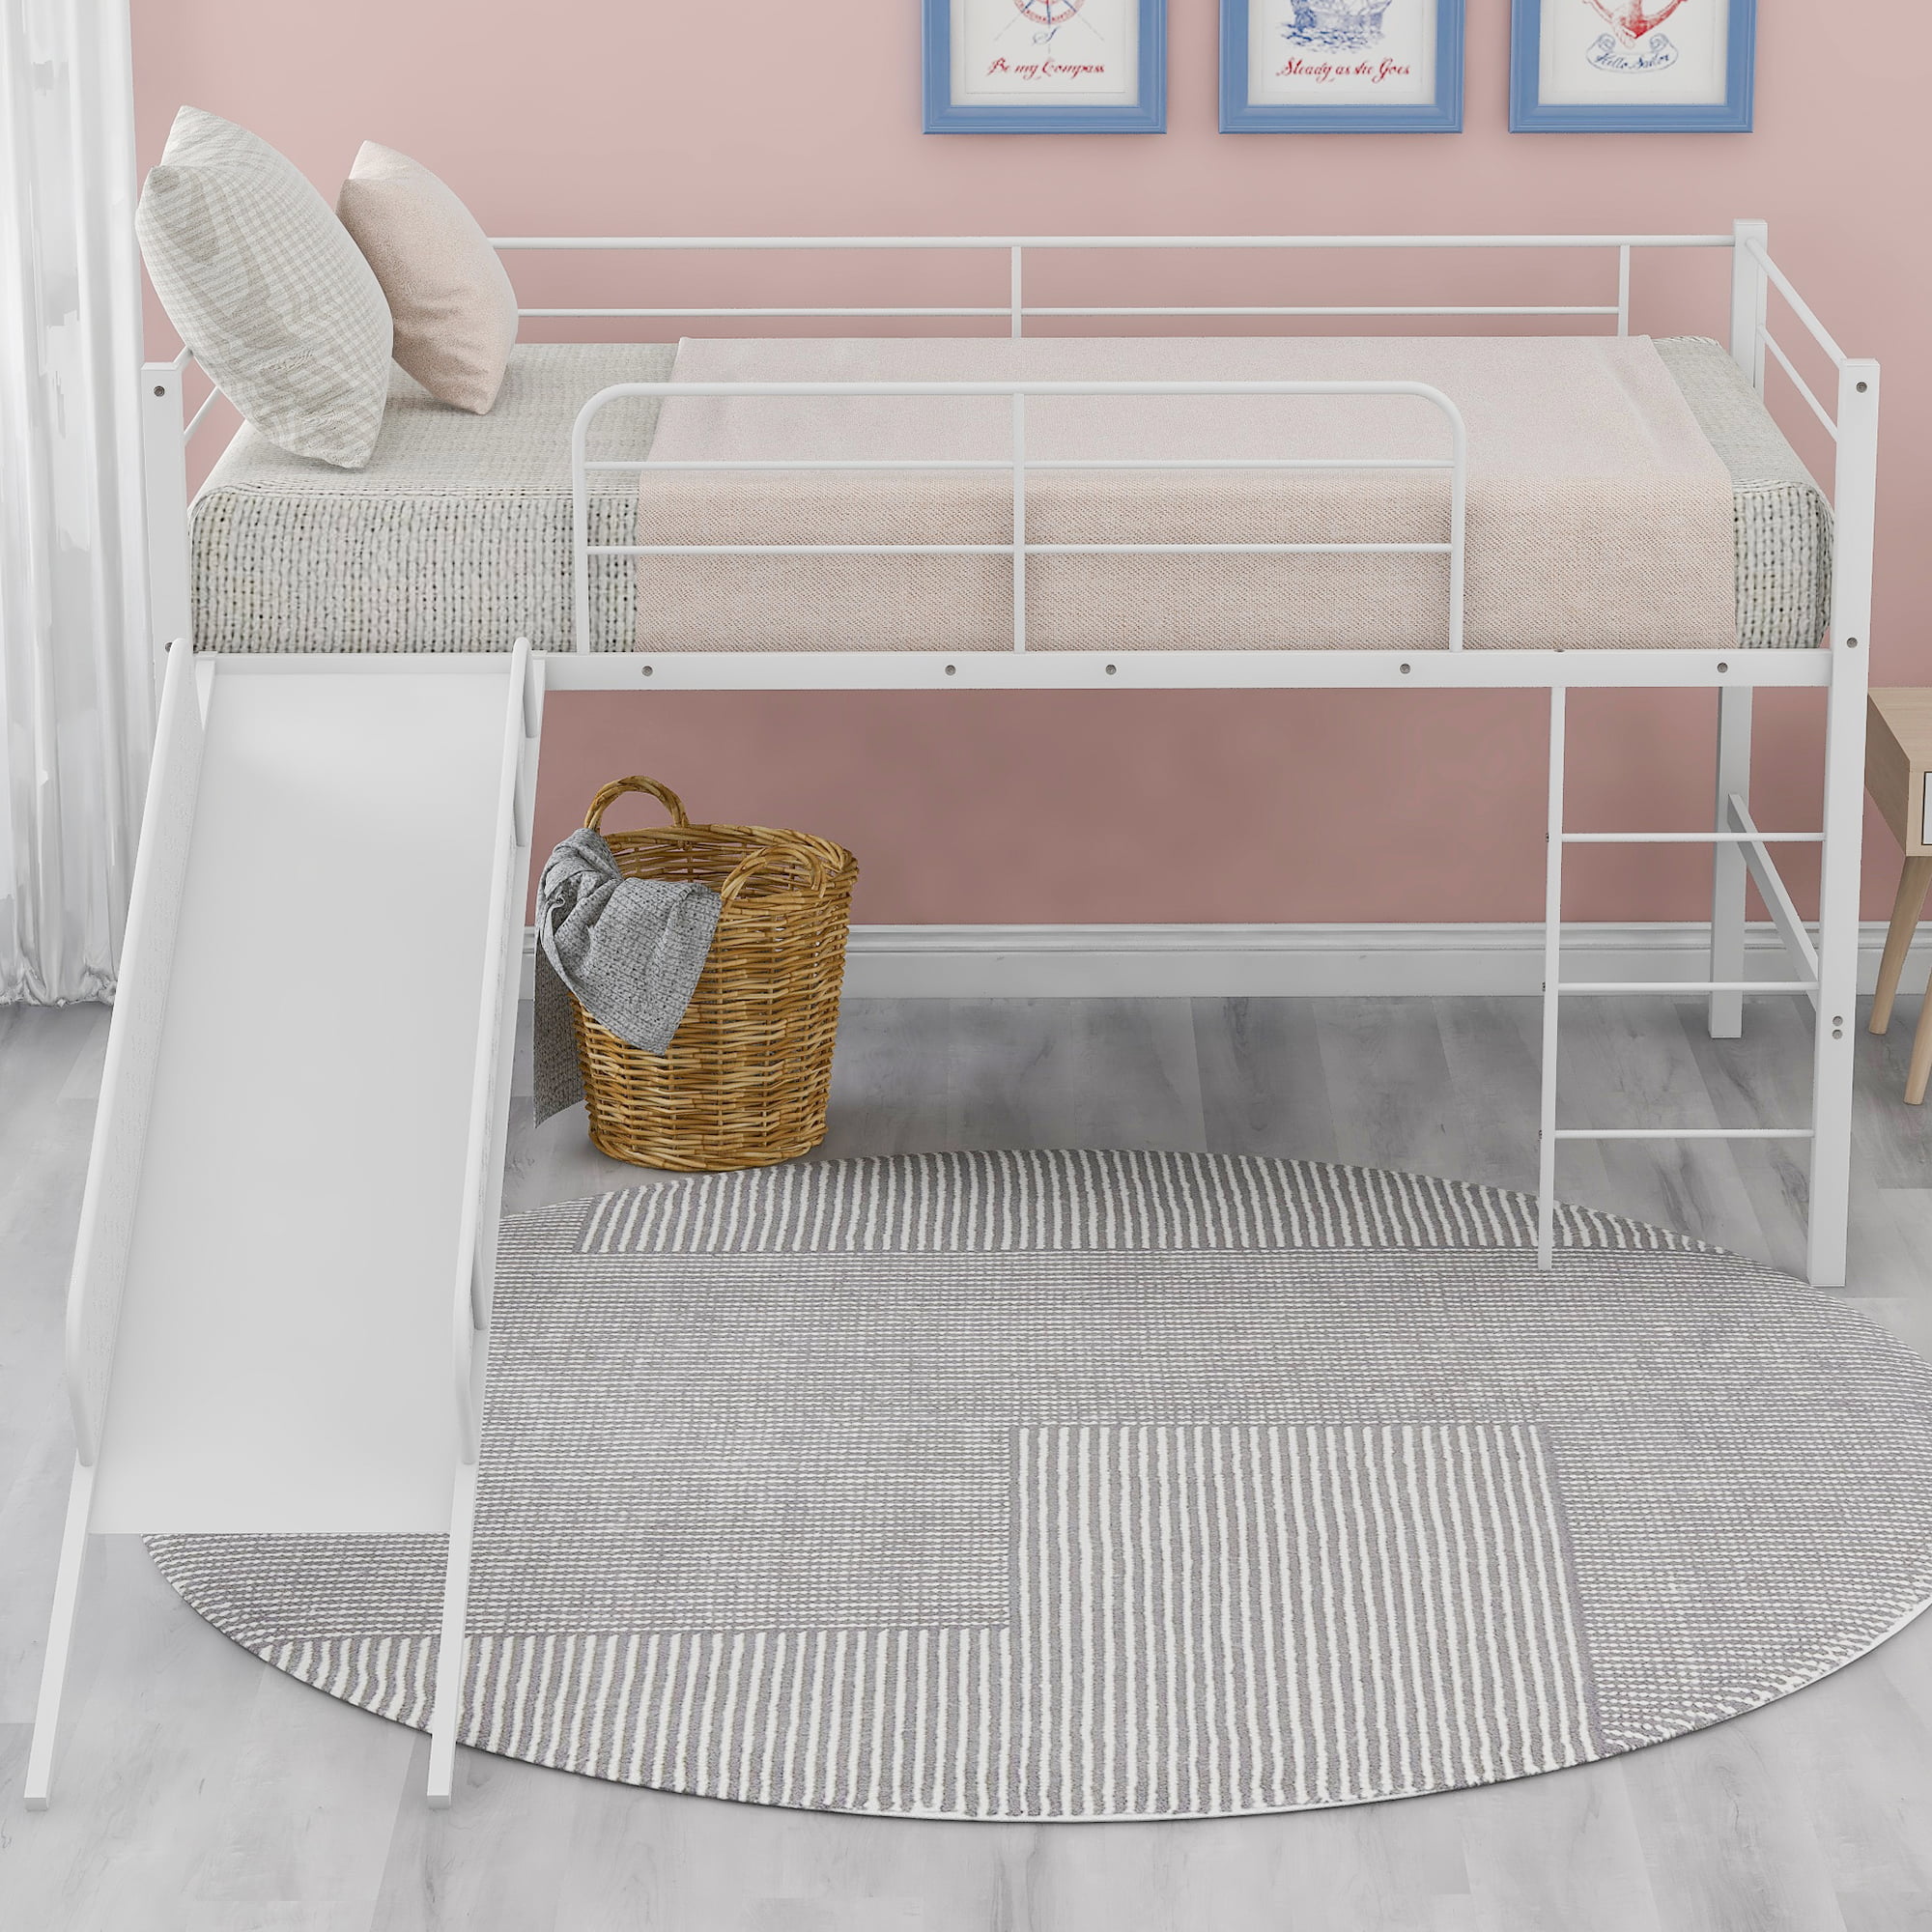 Kids Twin Size Loft Bed With Slide For, Bunk Bed With Slide For Girls